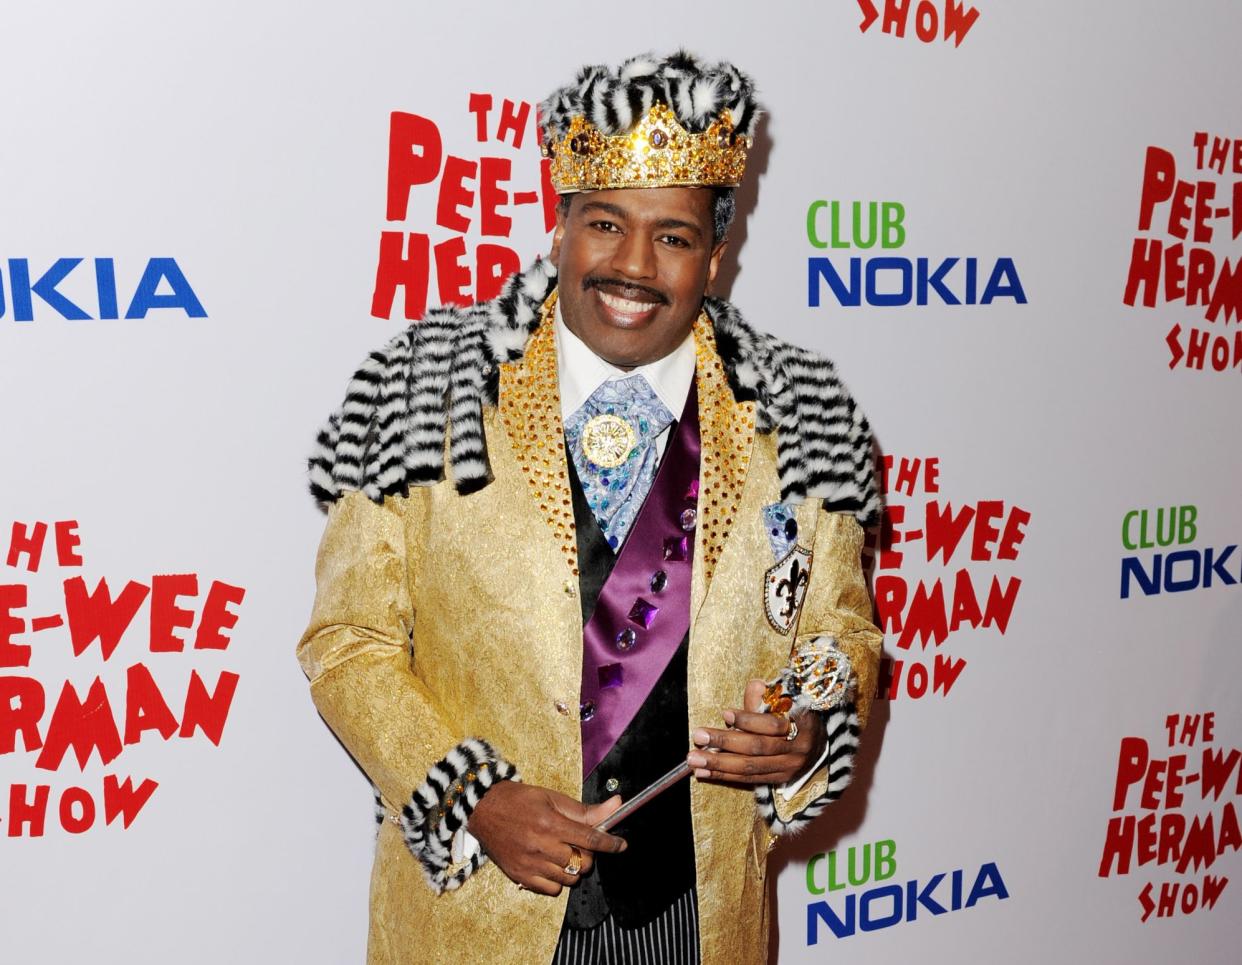 John Paragon arrives at the opening night of "The Pee-wee Herman Show" in Club Nokia at L.A. Live on January 20, 2010 in Los Angeles, California. 